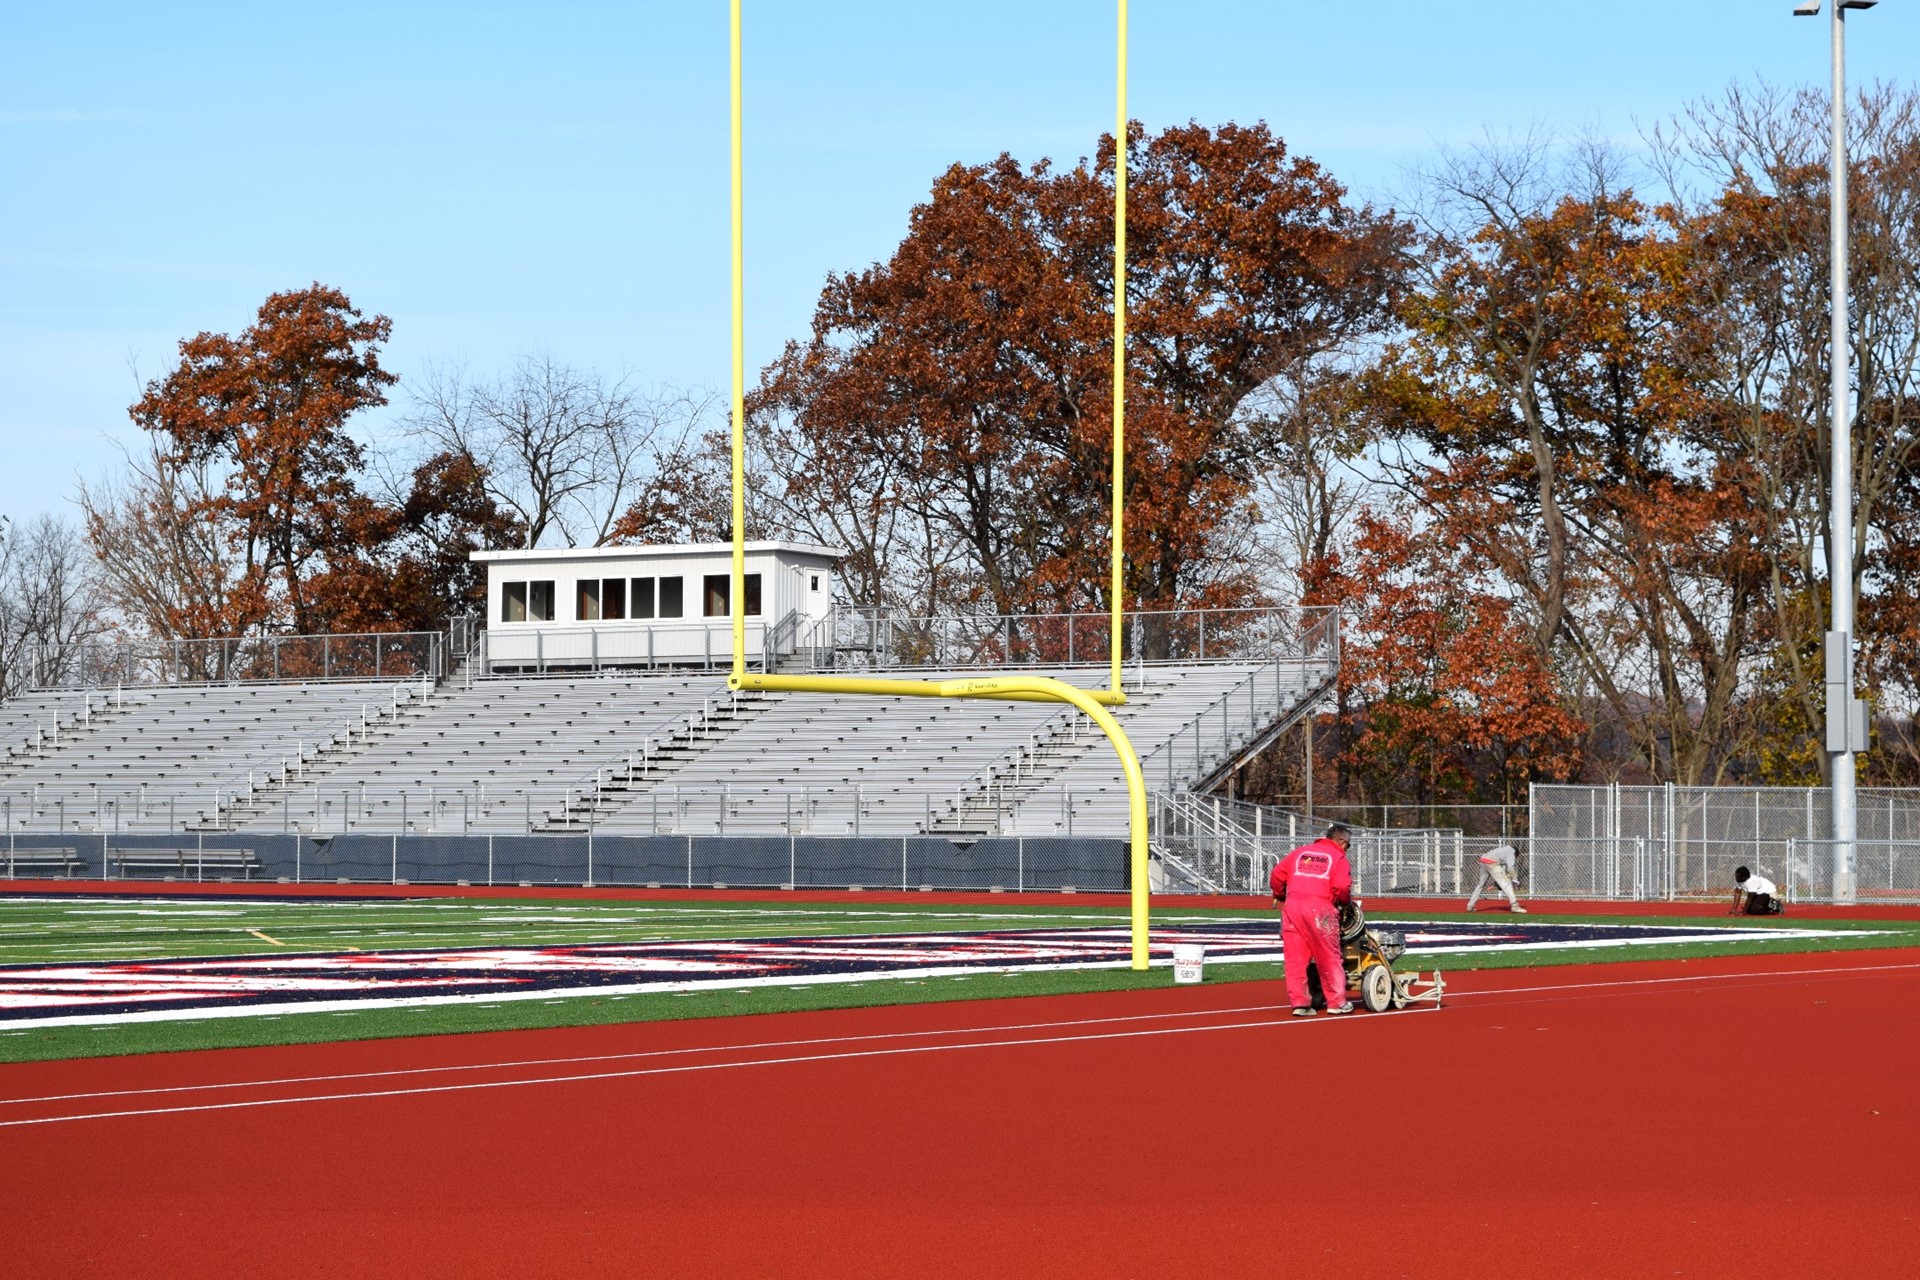 Lines being painted on the track surface